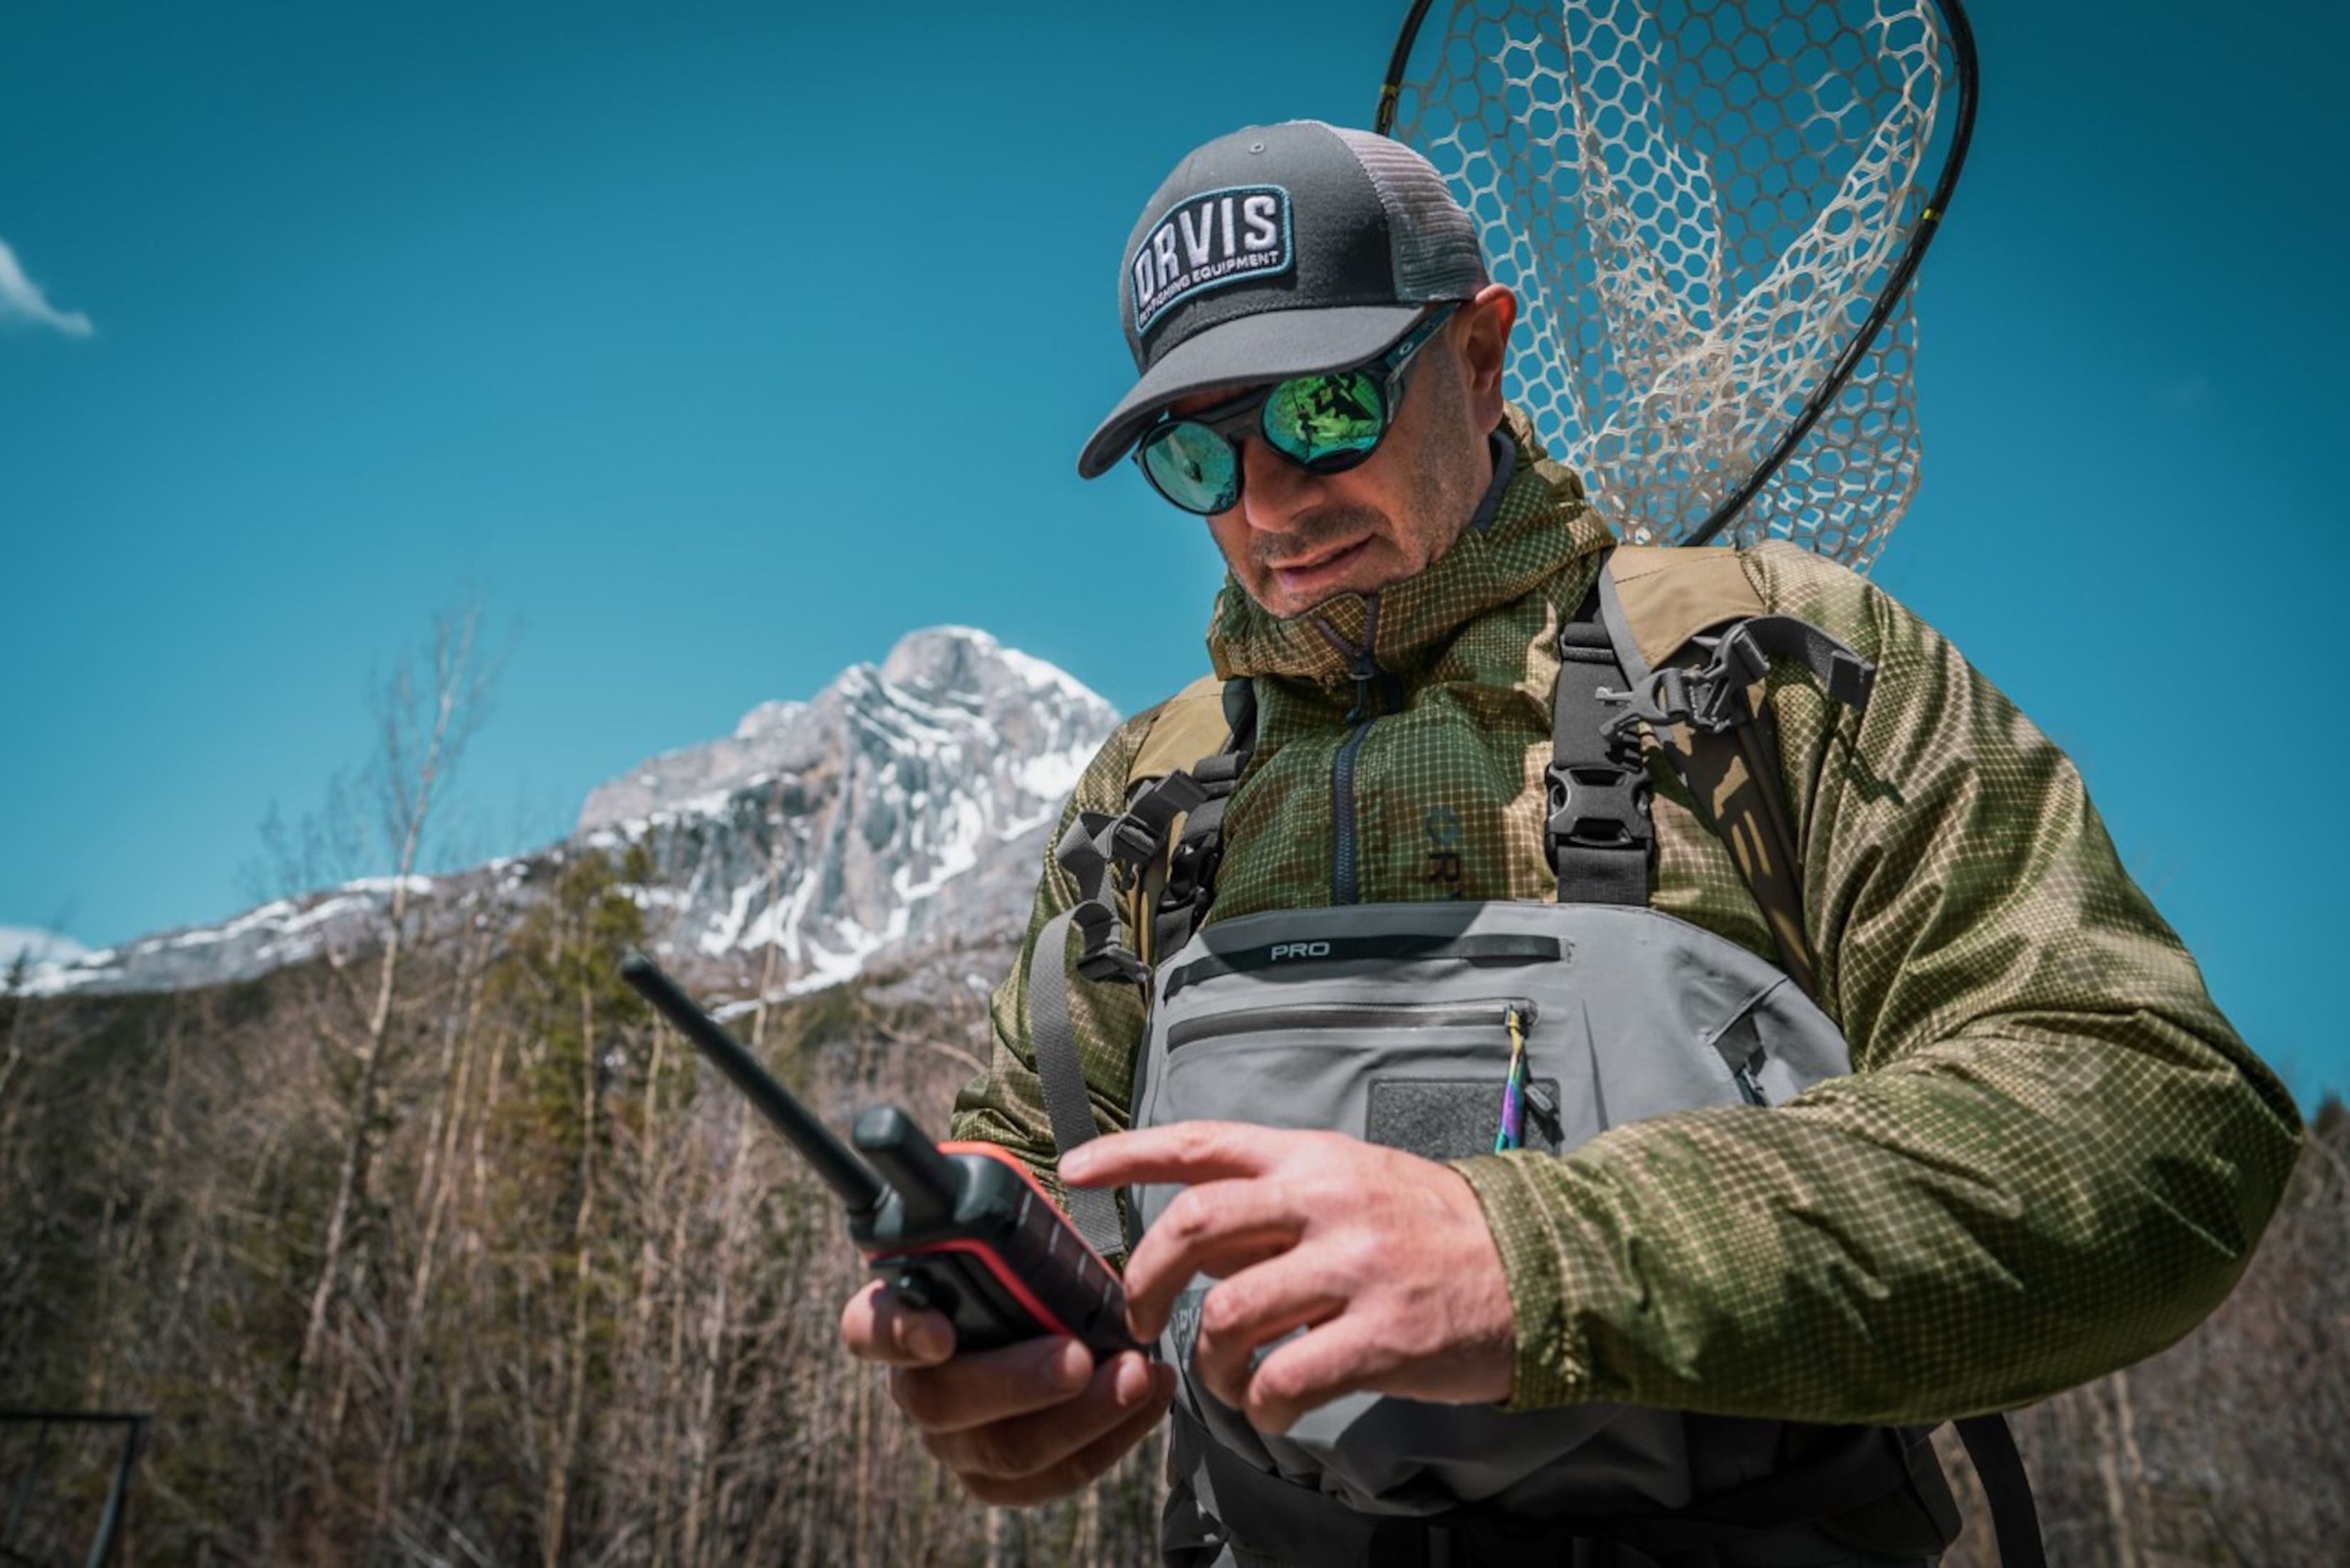 Bestselling Performance Apparel & Travel Gear From Orvis